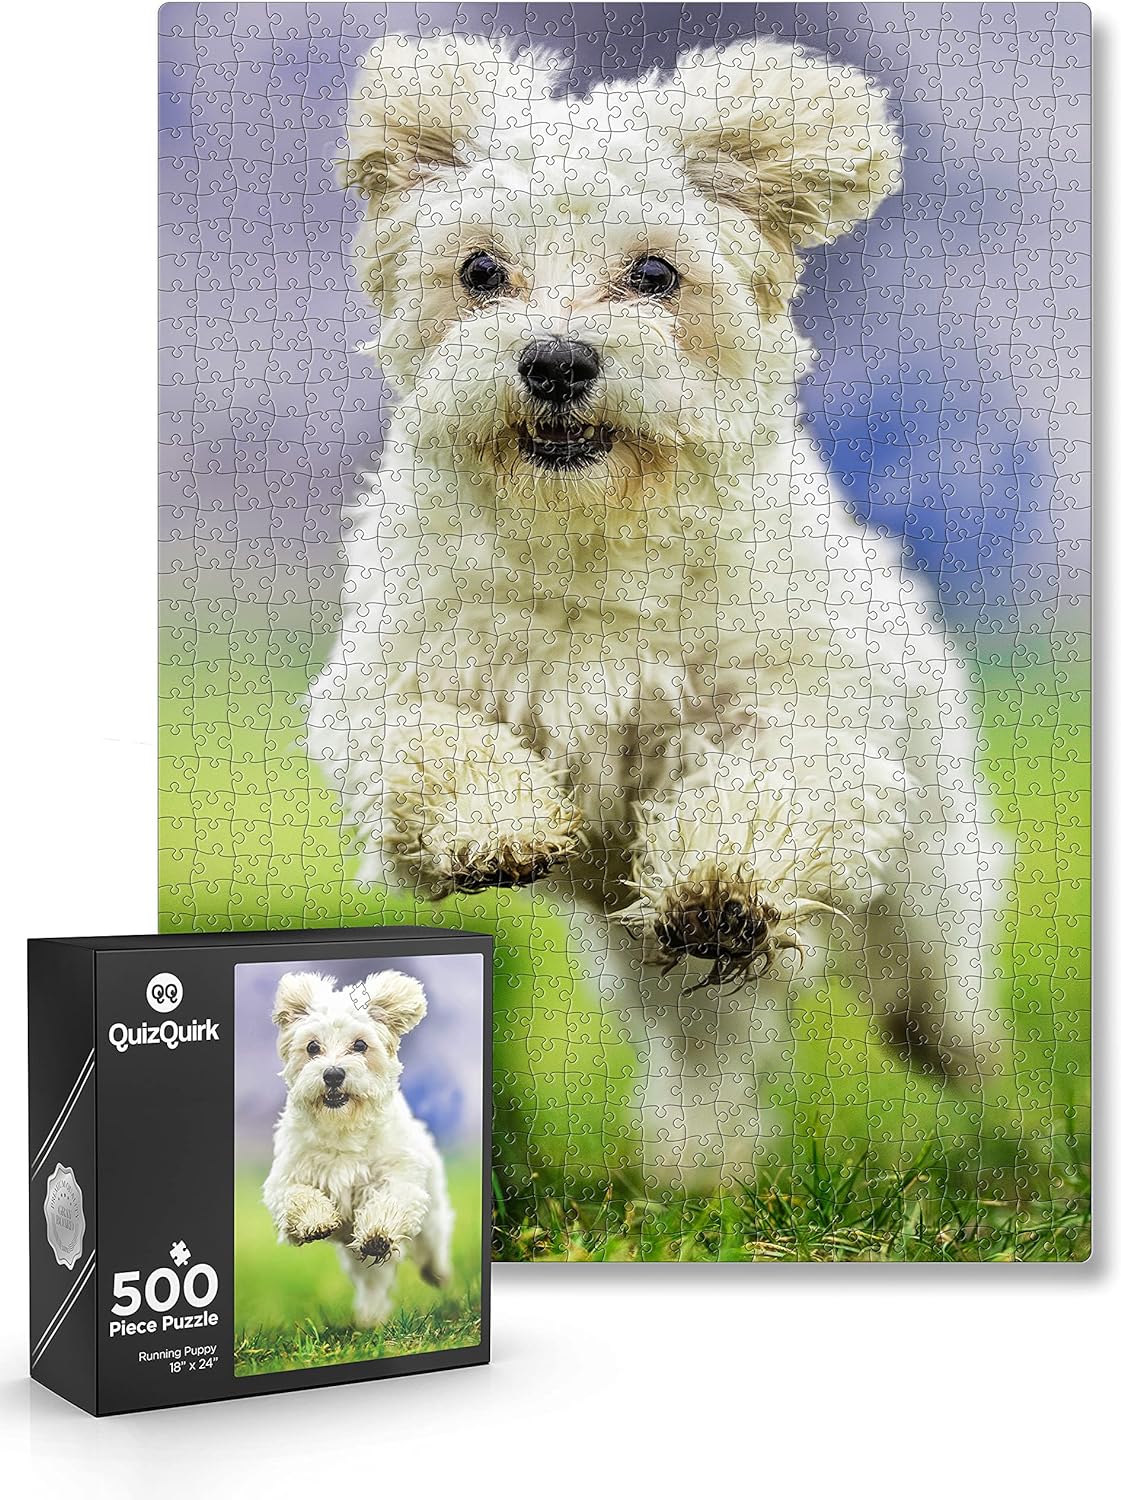 QuizQuirk 500 Piece Puzzle, Jumping Dog Jigsaw Puzzle for Adults/Teens (Puzzle Saver Kit Included)